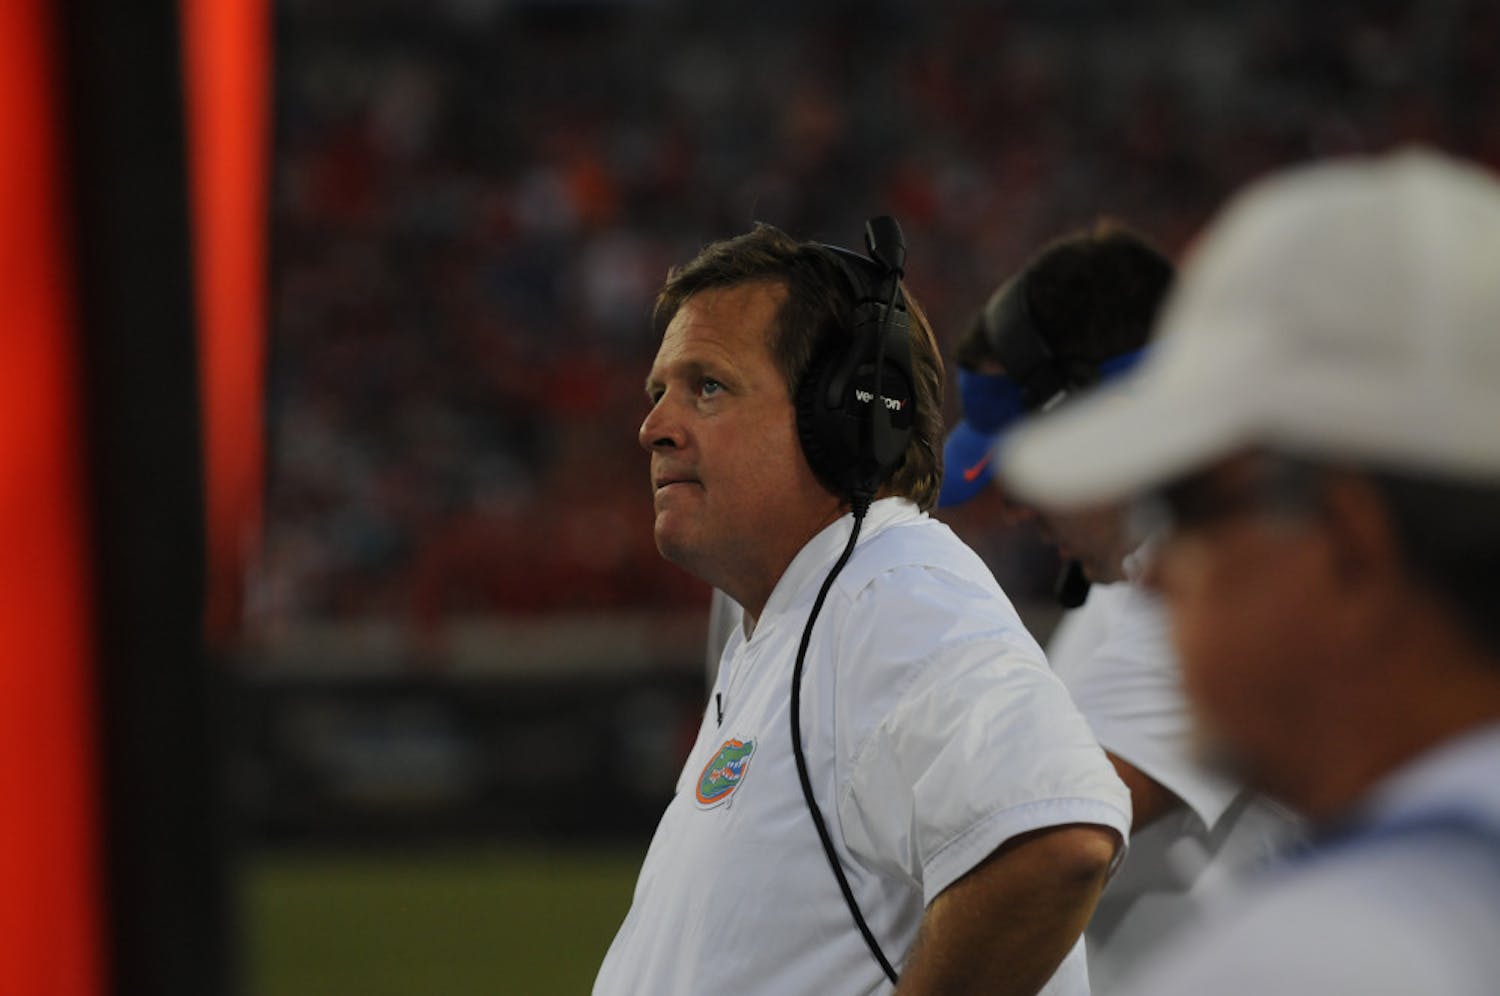 Coach Jim McElwain looks on during Florida's 24-10 win over Georgia on Oct. 29, 2016, in Jacksonville.